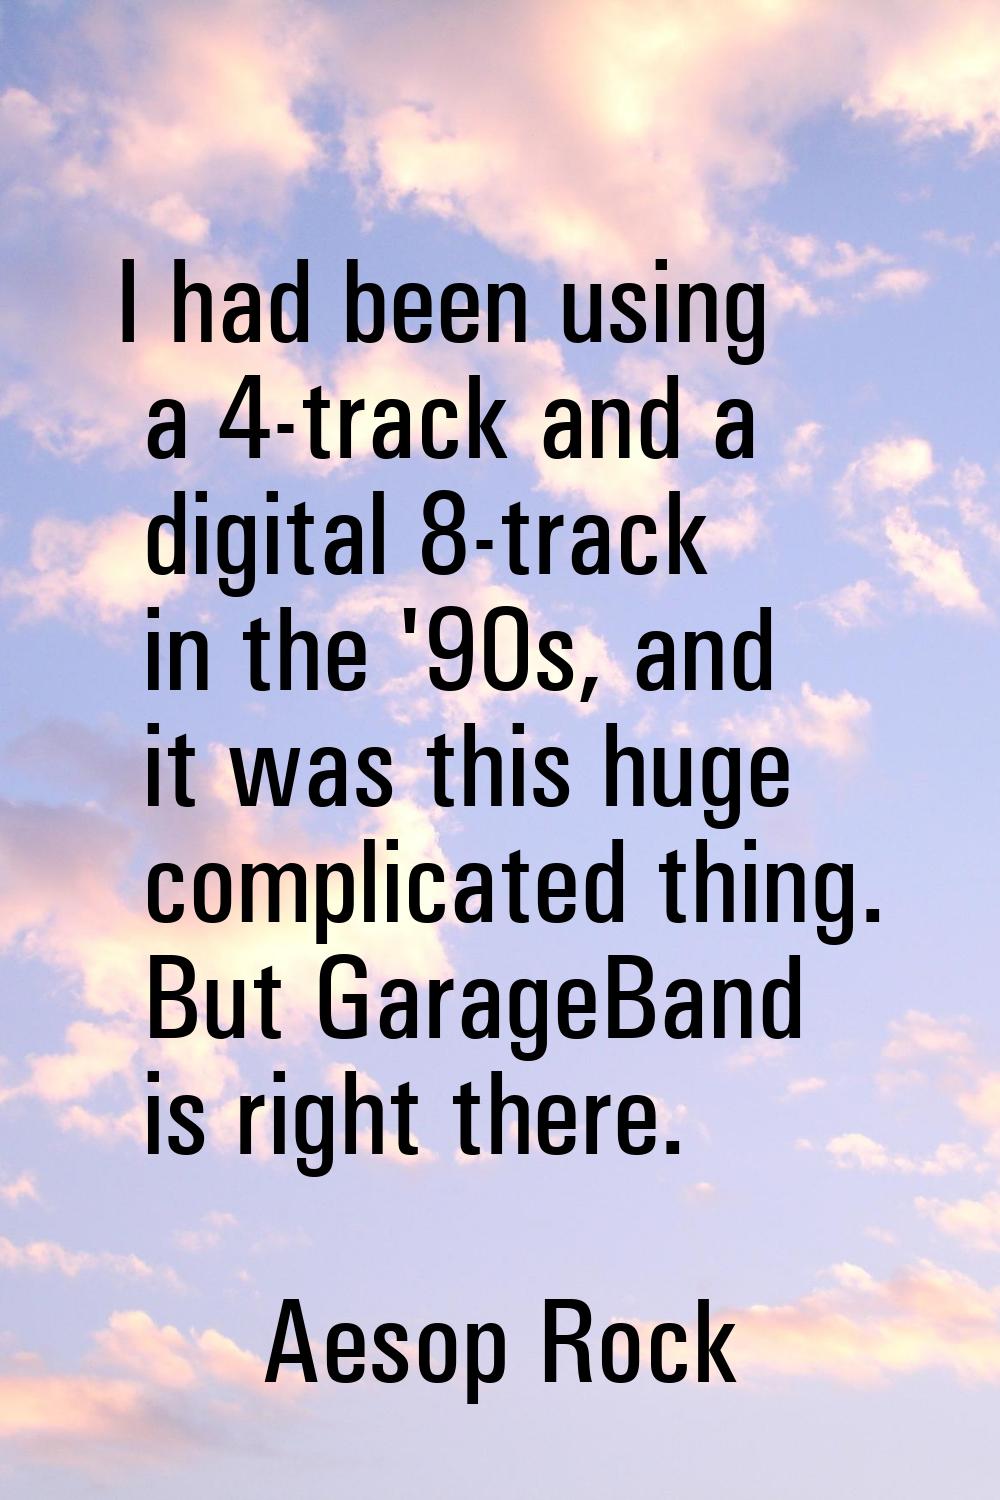 I had been using a 4-track and a digital 8-track in the '90s, and it was this huge complicated thin